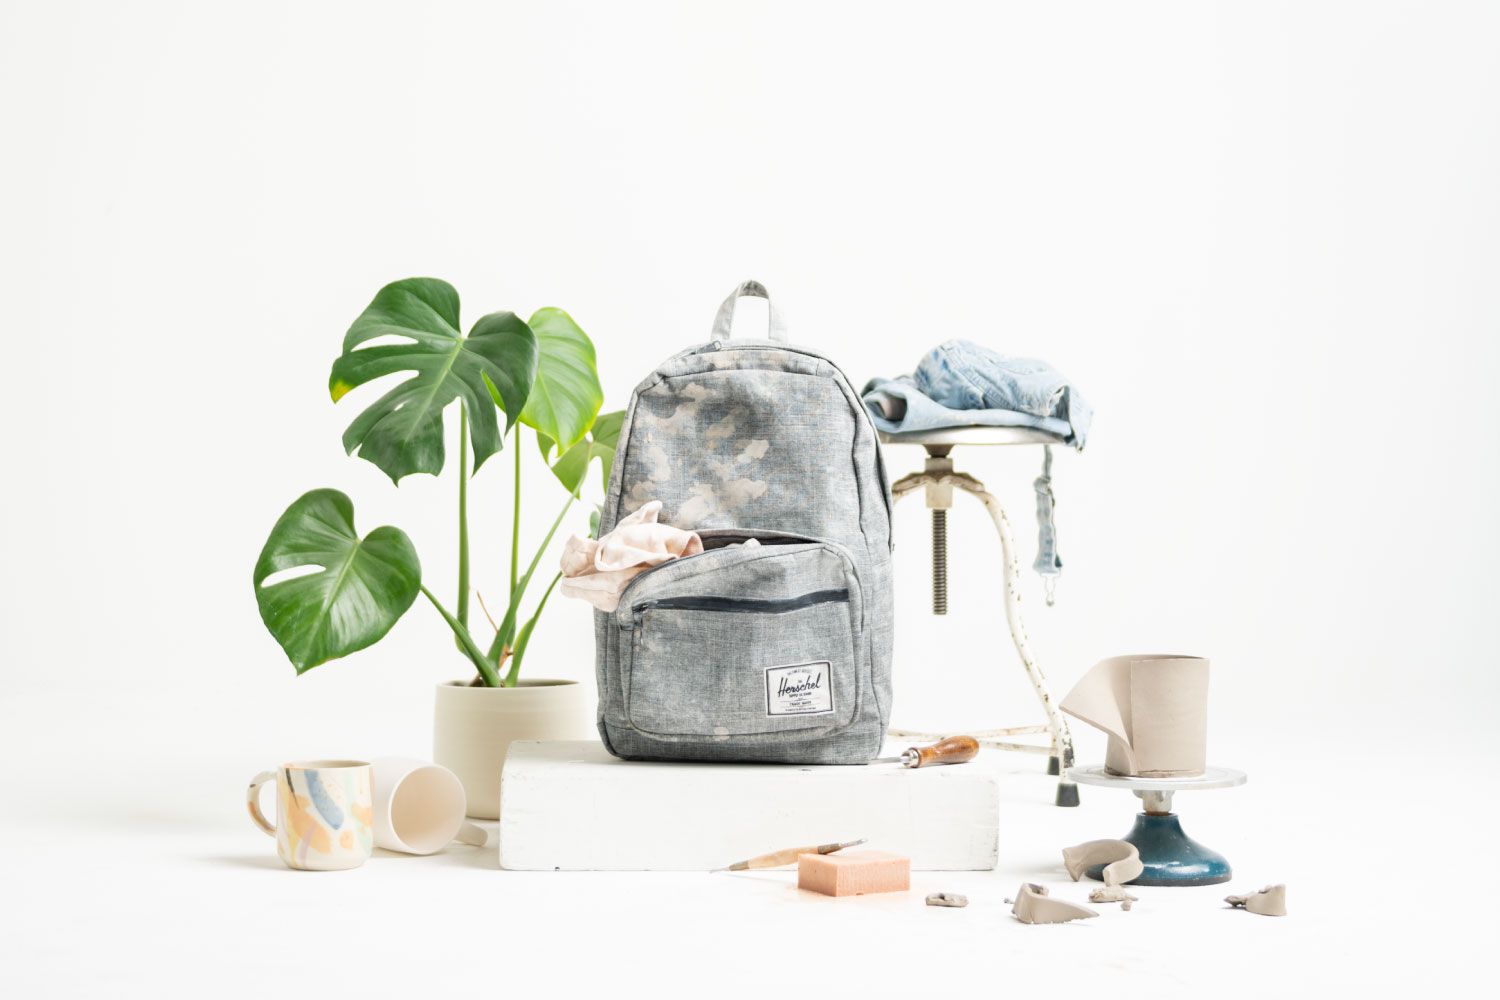 A Herschel Classic Backpack XL in Raven Crosshatch next to a potted plant and a potter stool, apron, and some pottery tools